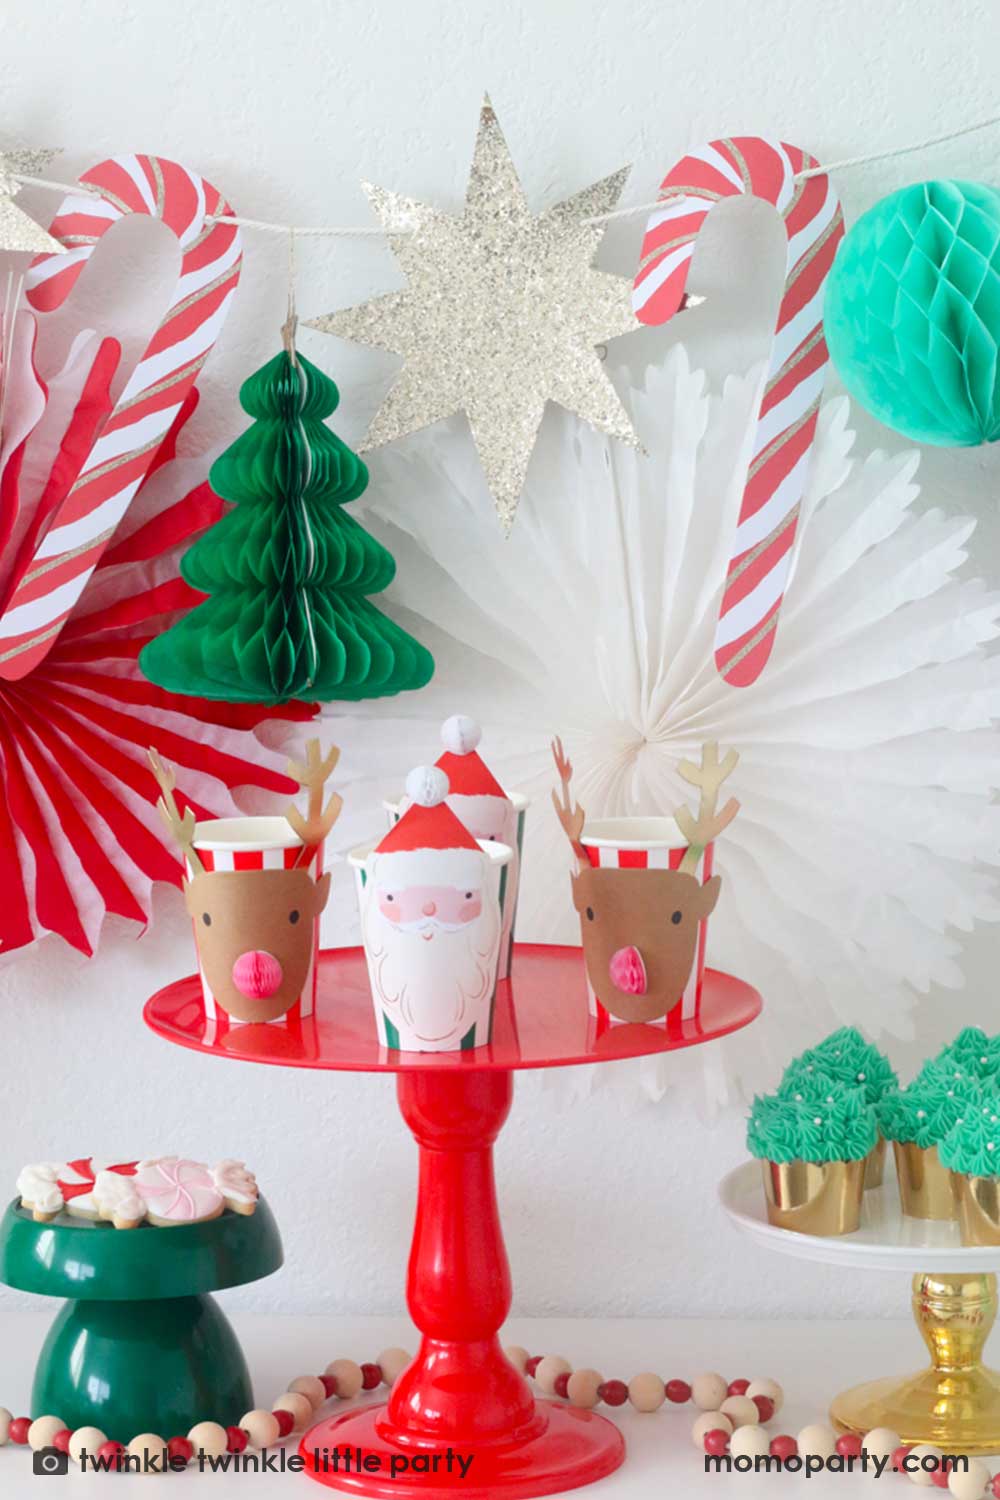 A Christmas Dessert Table decorated with Momo Party's Christmas honeycomb decorations featuring candy canes, honeycomb Christmas trees and mint honeycomb balls. On the table there's a red cake stand with Meri Meri's Christmas honeycomb party cups in the design of Santa and reindeer, and a gold cake stand with Christmas tree buttercream cupcakes and a small dark green cake stand with peppermint sugar cookies, making this a perfect  inspo for a festive Holiday party setup.